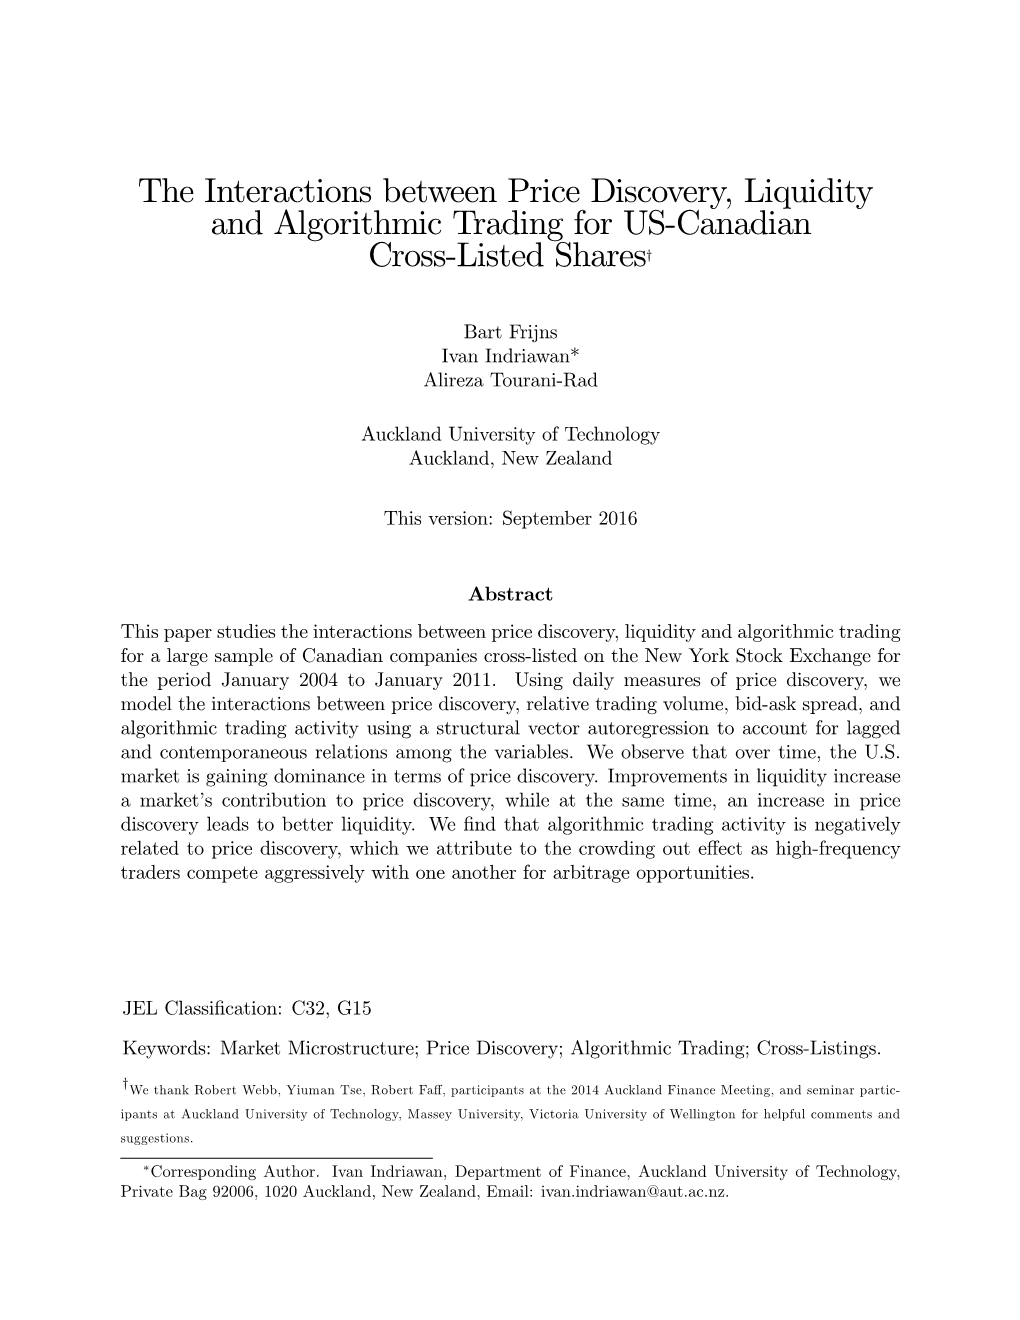 The Interactions Between Price Discovery, Liquidity and Algorithmic Trading for US-Canadian